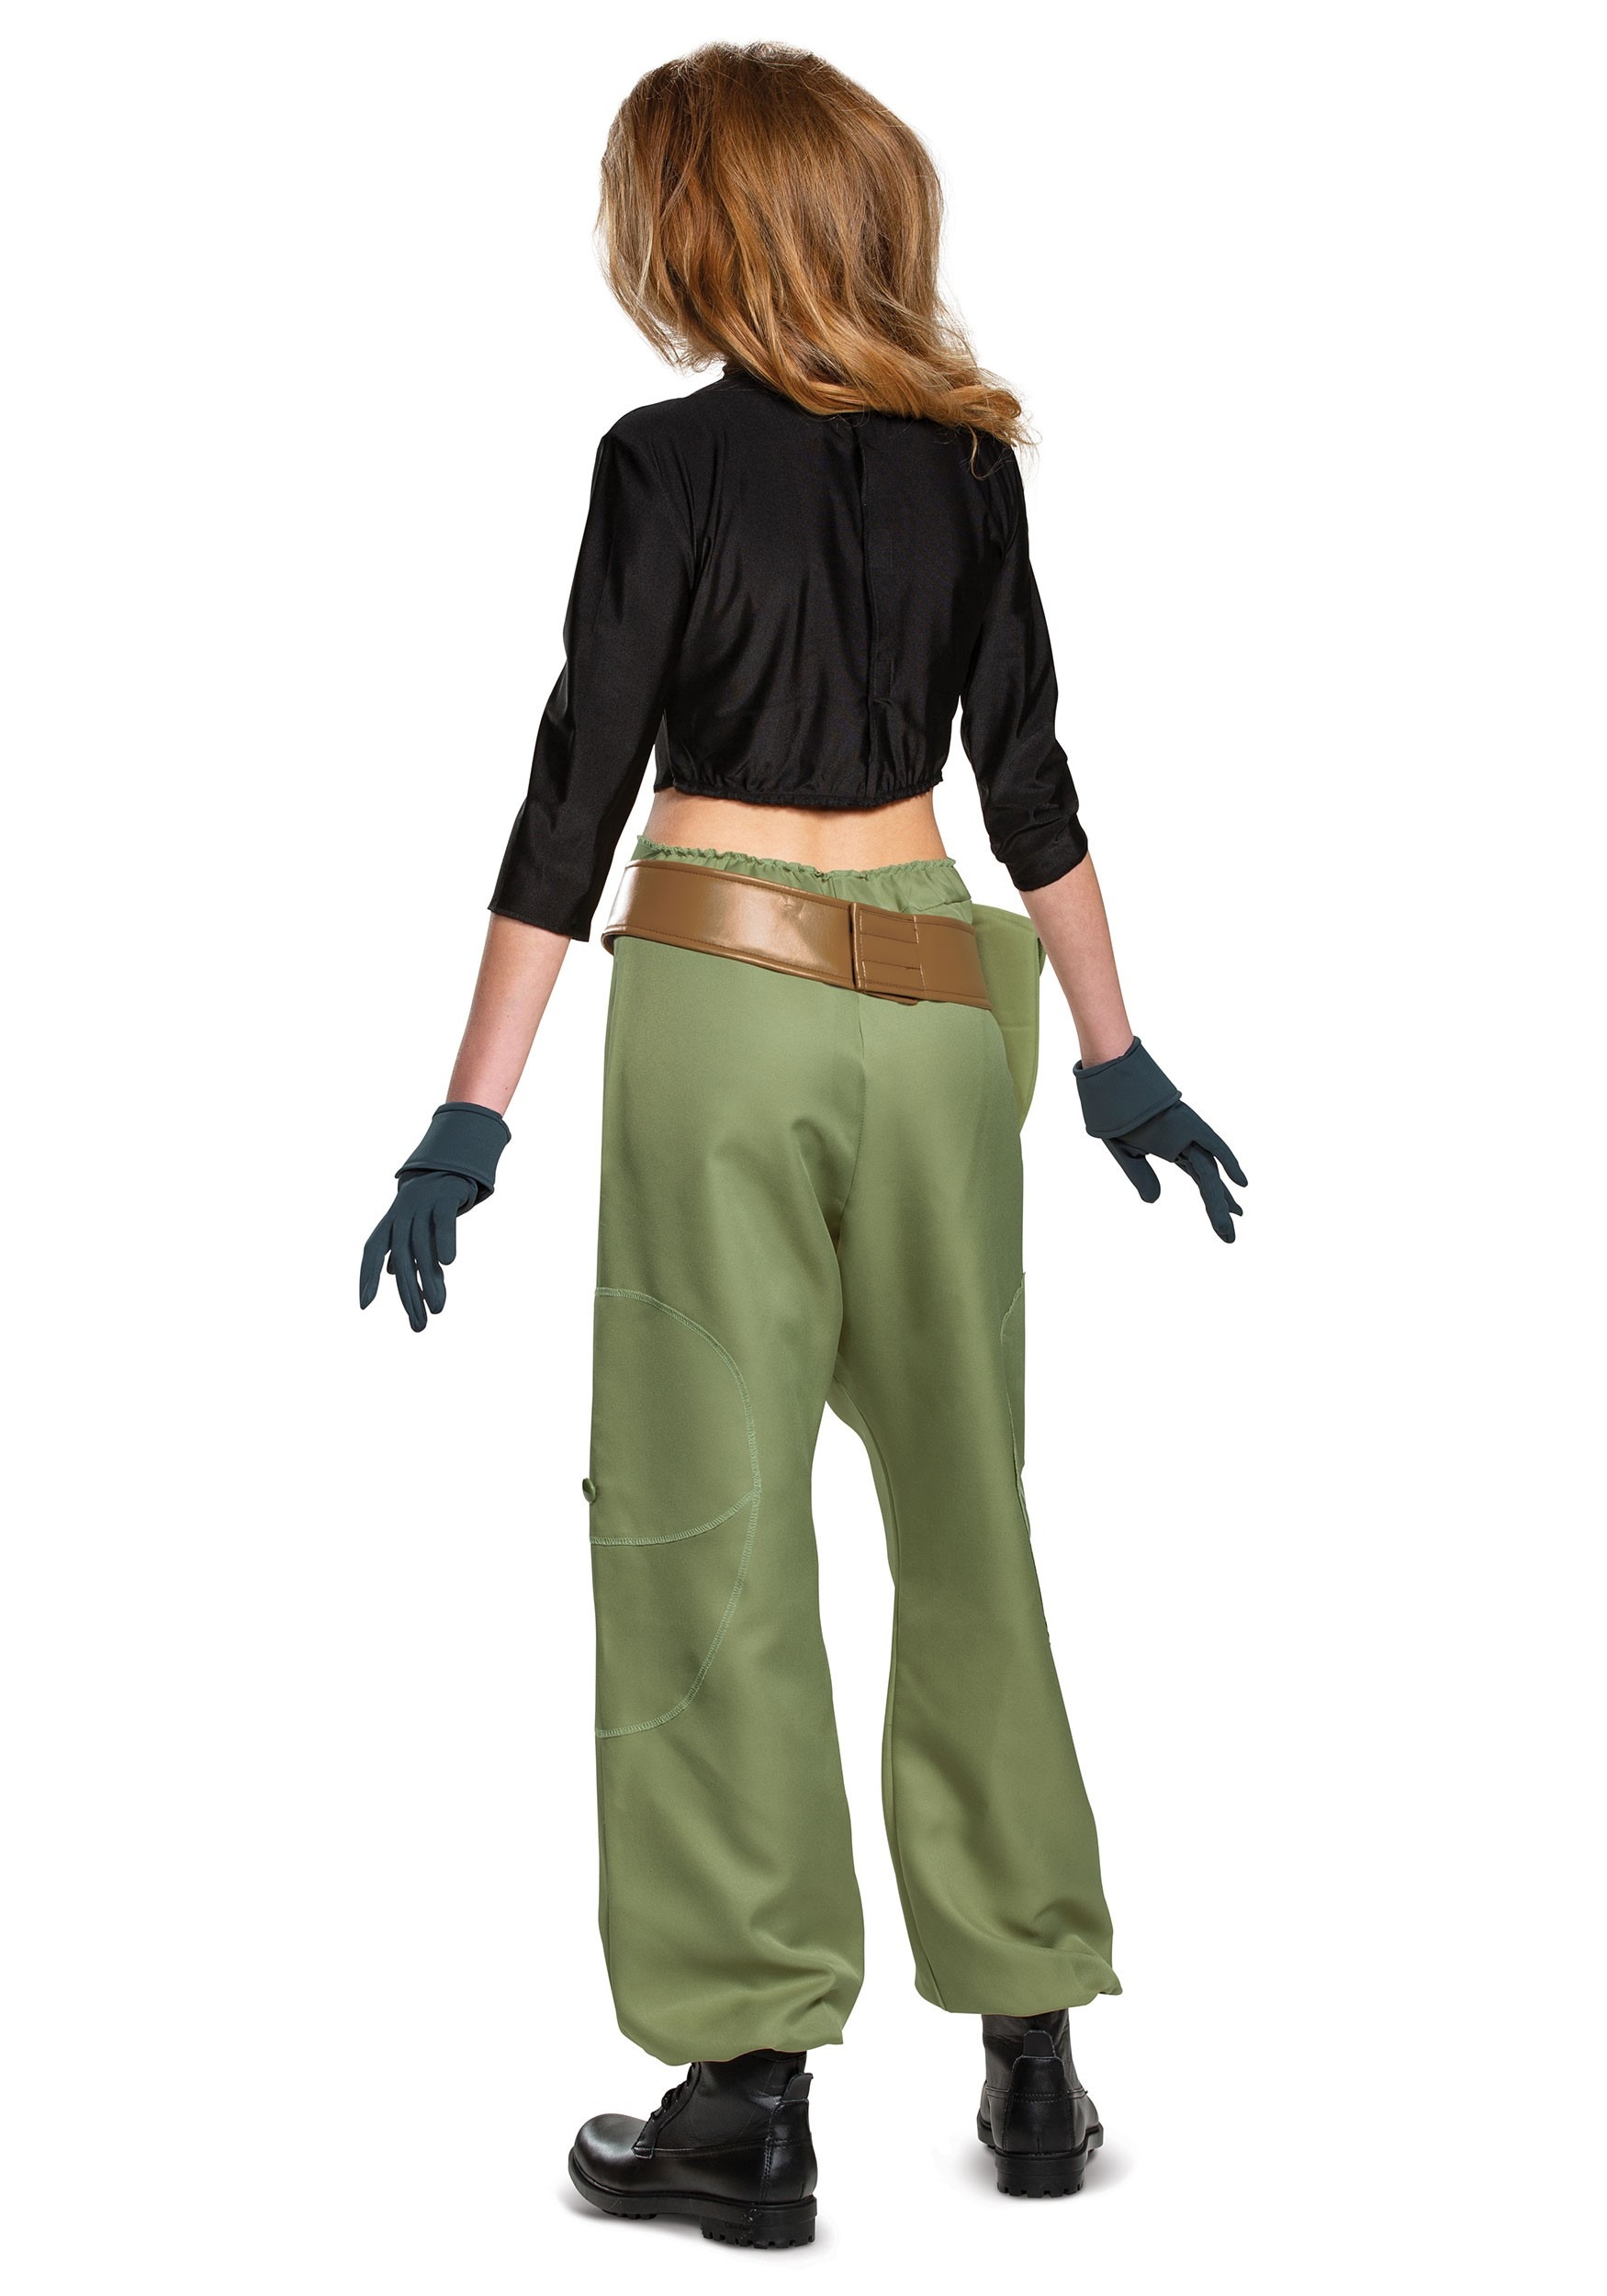 Kim Possible Animated Series Kim Possible Fancy Dress Costume For Women